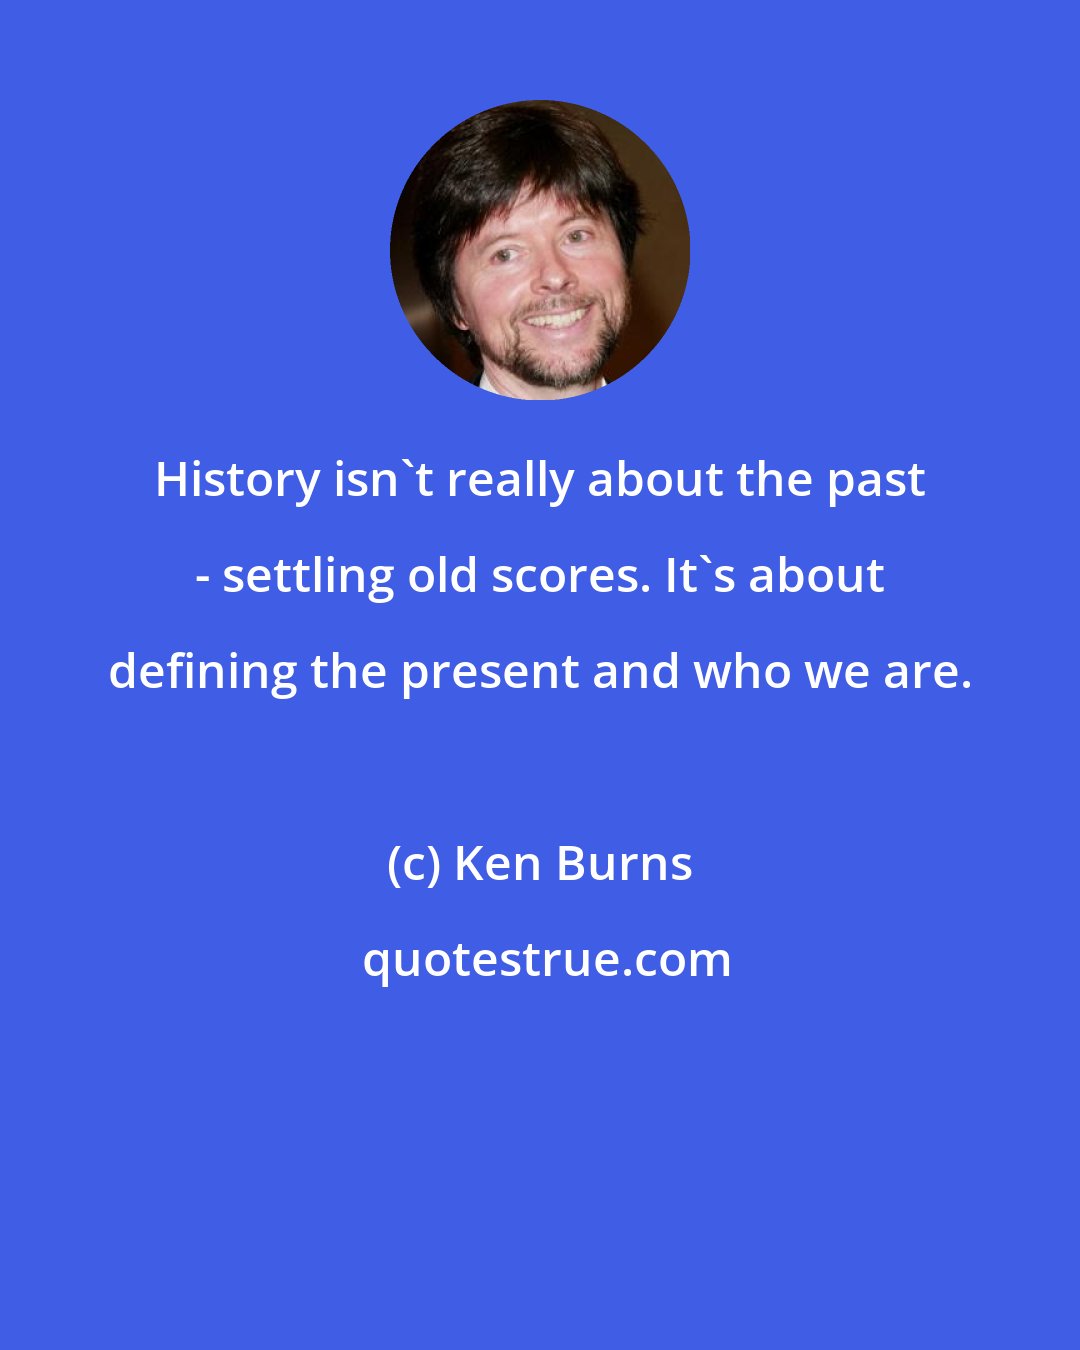 Ken Burns: History isn't really about the past - settling old scores. It's about defining the present and who we are.